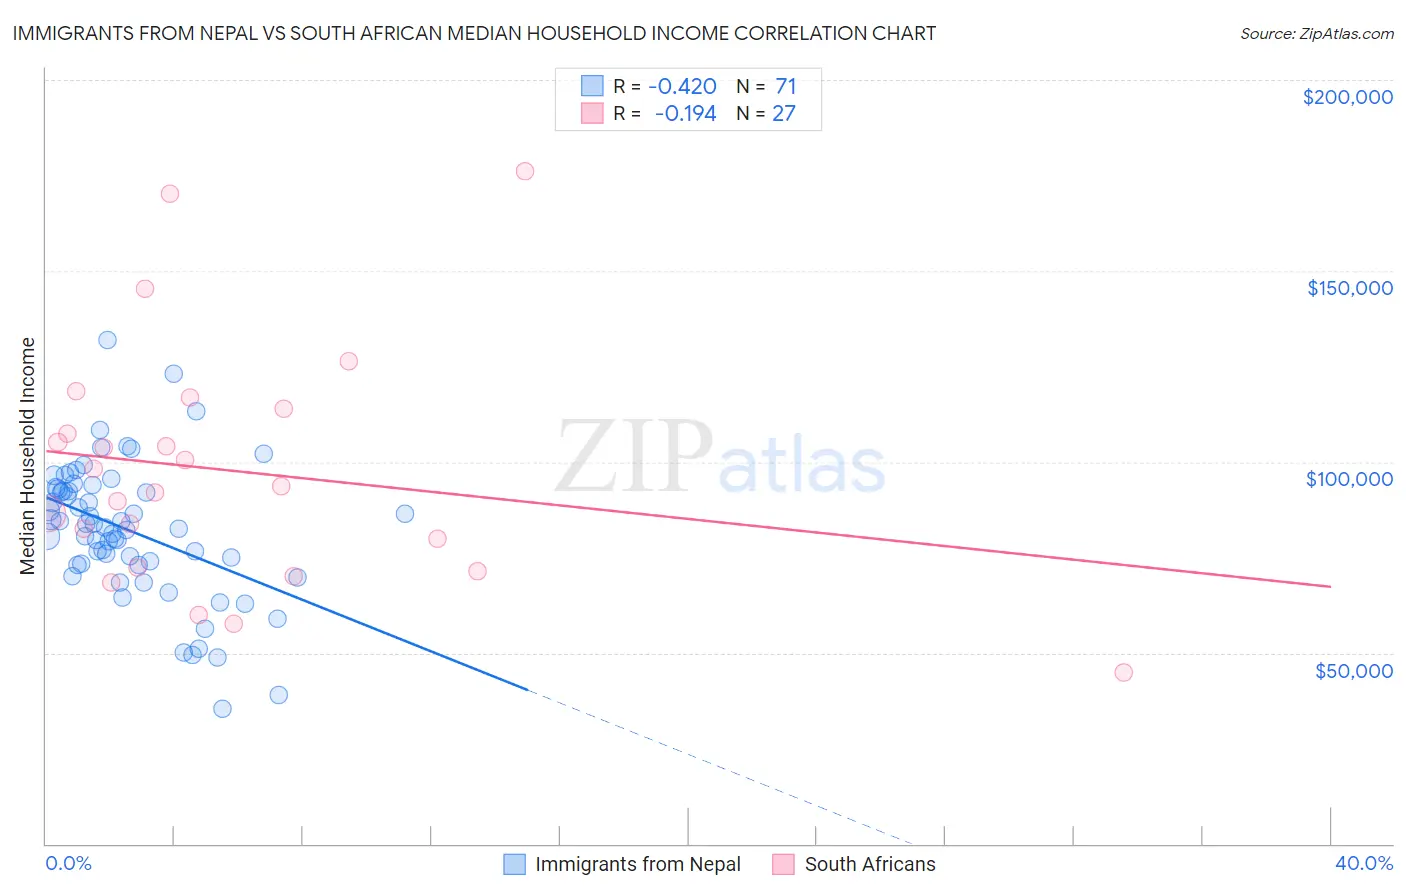 Immigrants from Nepal vs South African Median Household Income